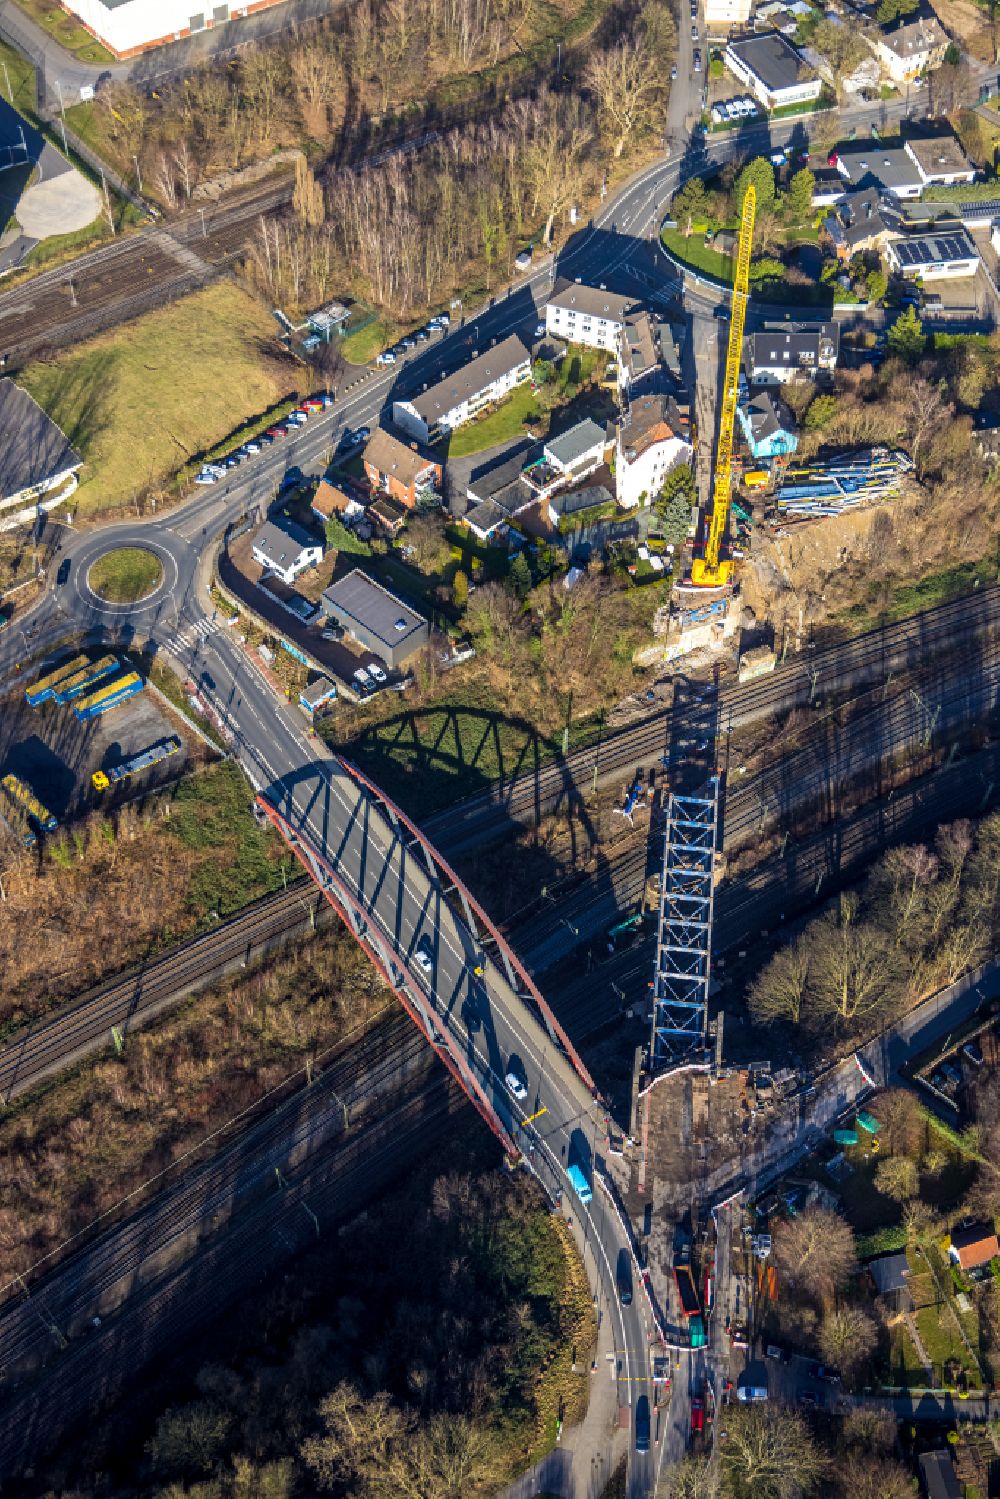 Aerial image Bochum - Construction of road bridge of Buselohbruecke in Bochum in the state North Rhine-Westphalia, Germany. The bridge will connect the Harpener Str. with the Buselohstrasse